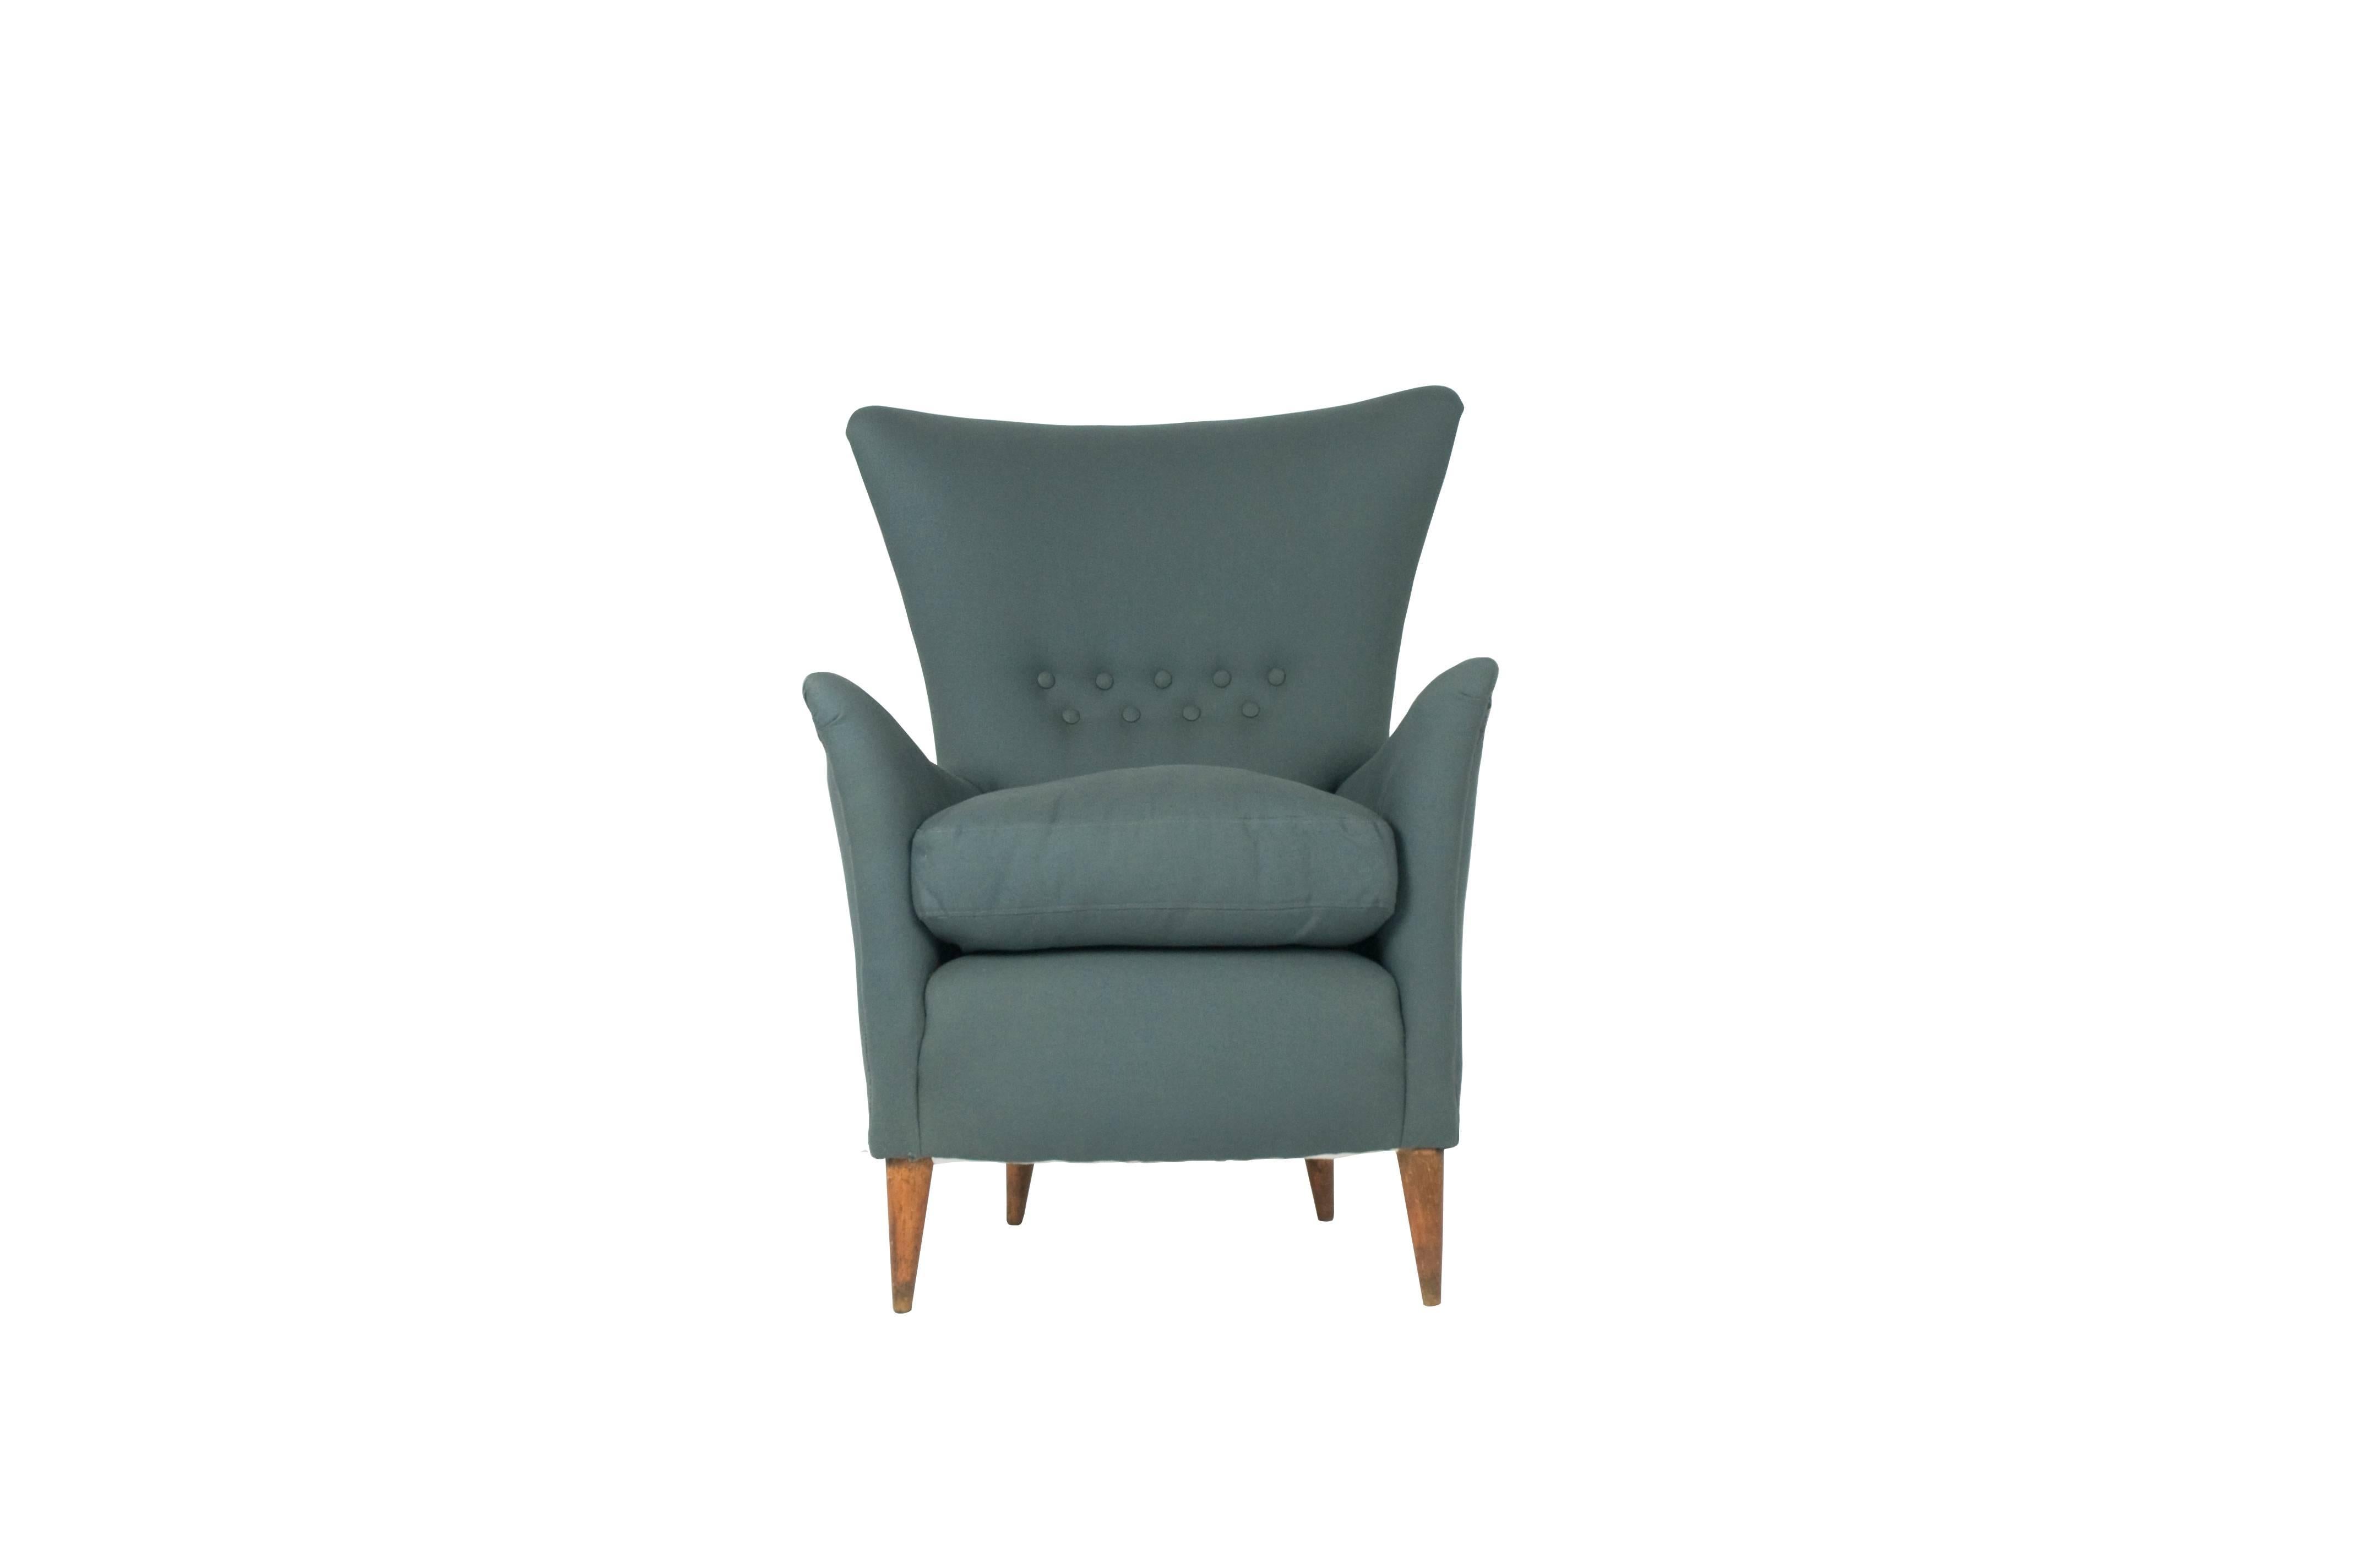 This beautiful vintage armchair was produced in the style of Gio Ponti and Carlo de Carli, circa 1950s. It features four wooden legs and it remains in a very good condition, fabric has been replaced.